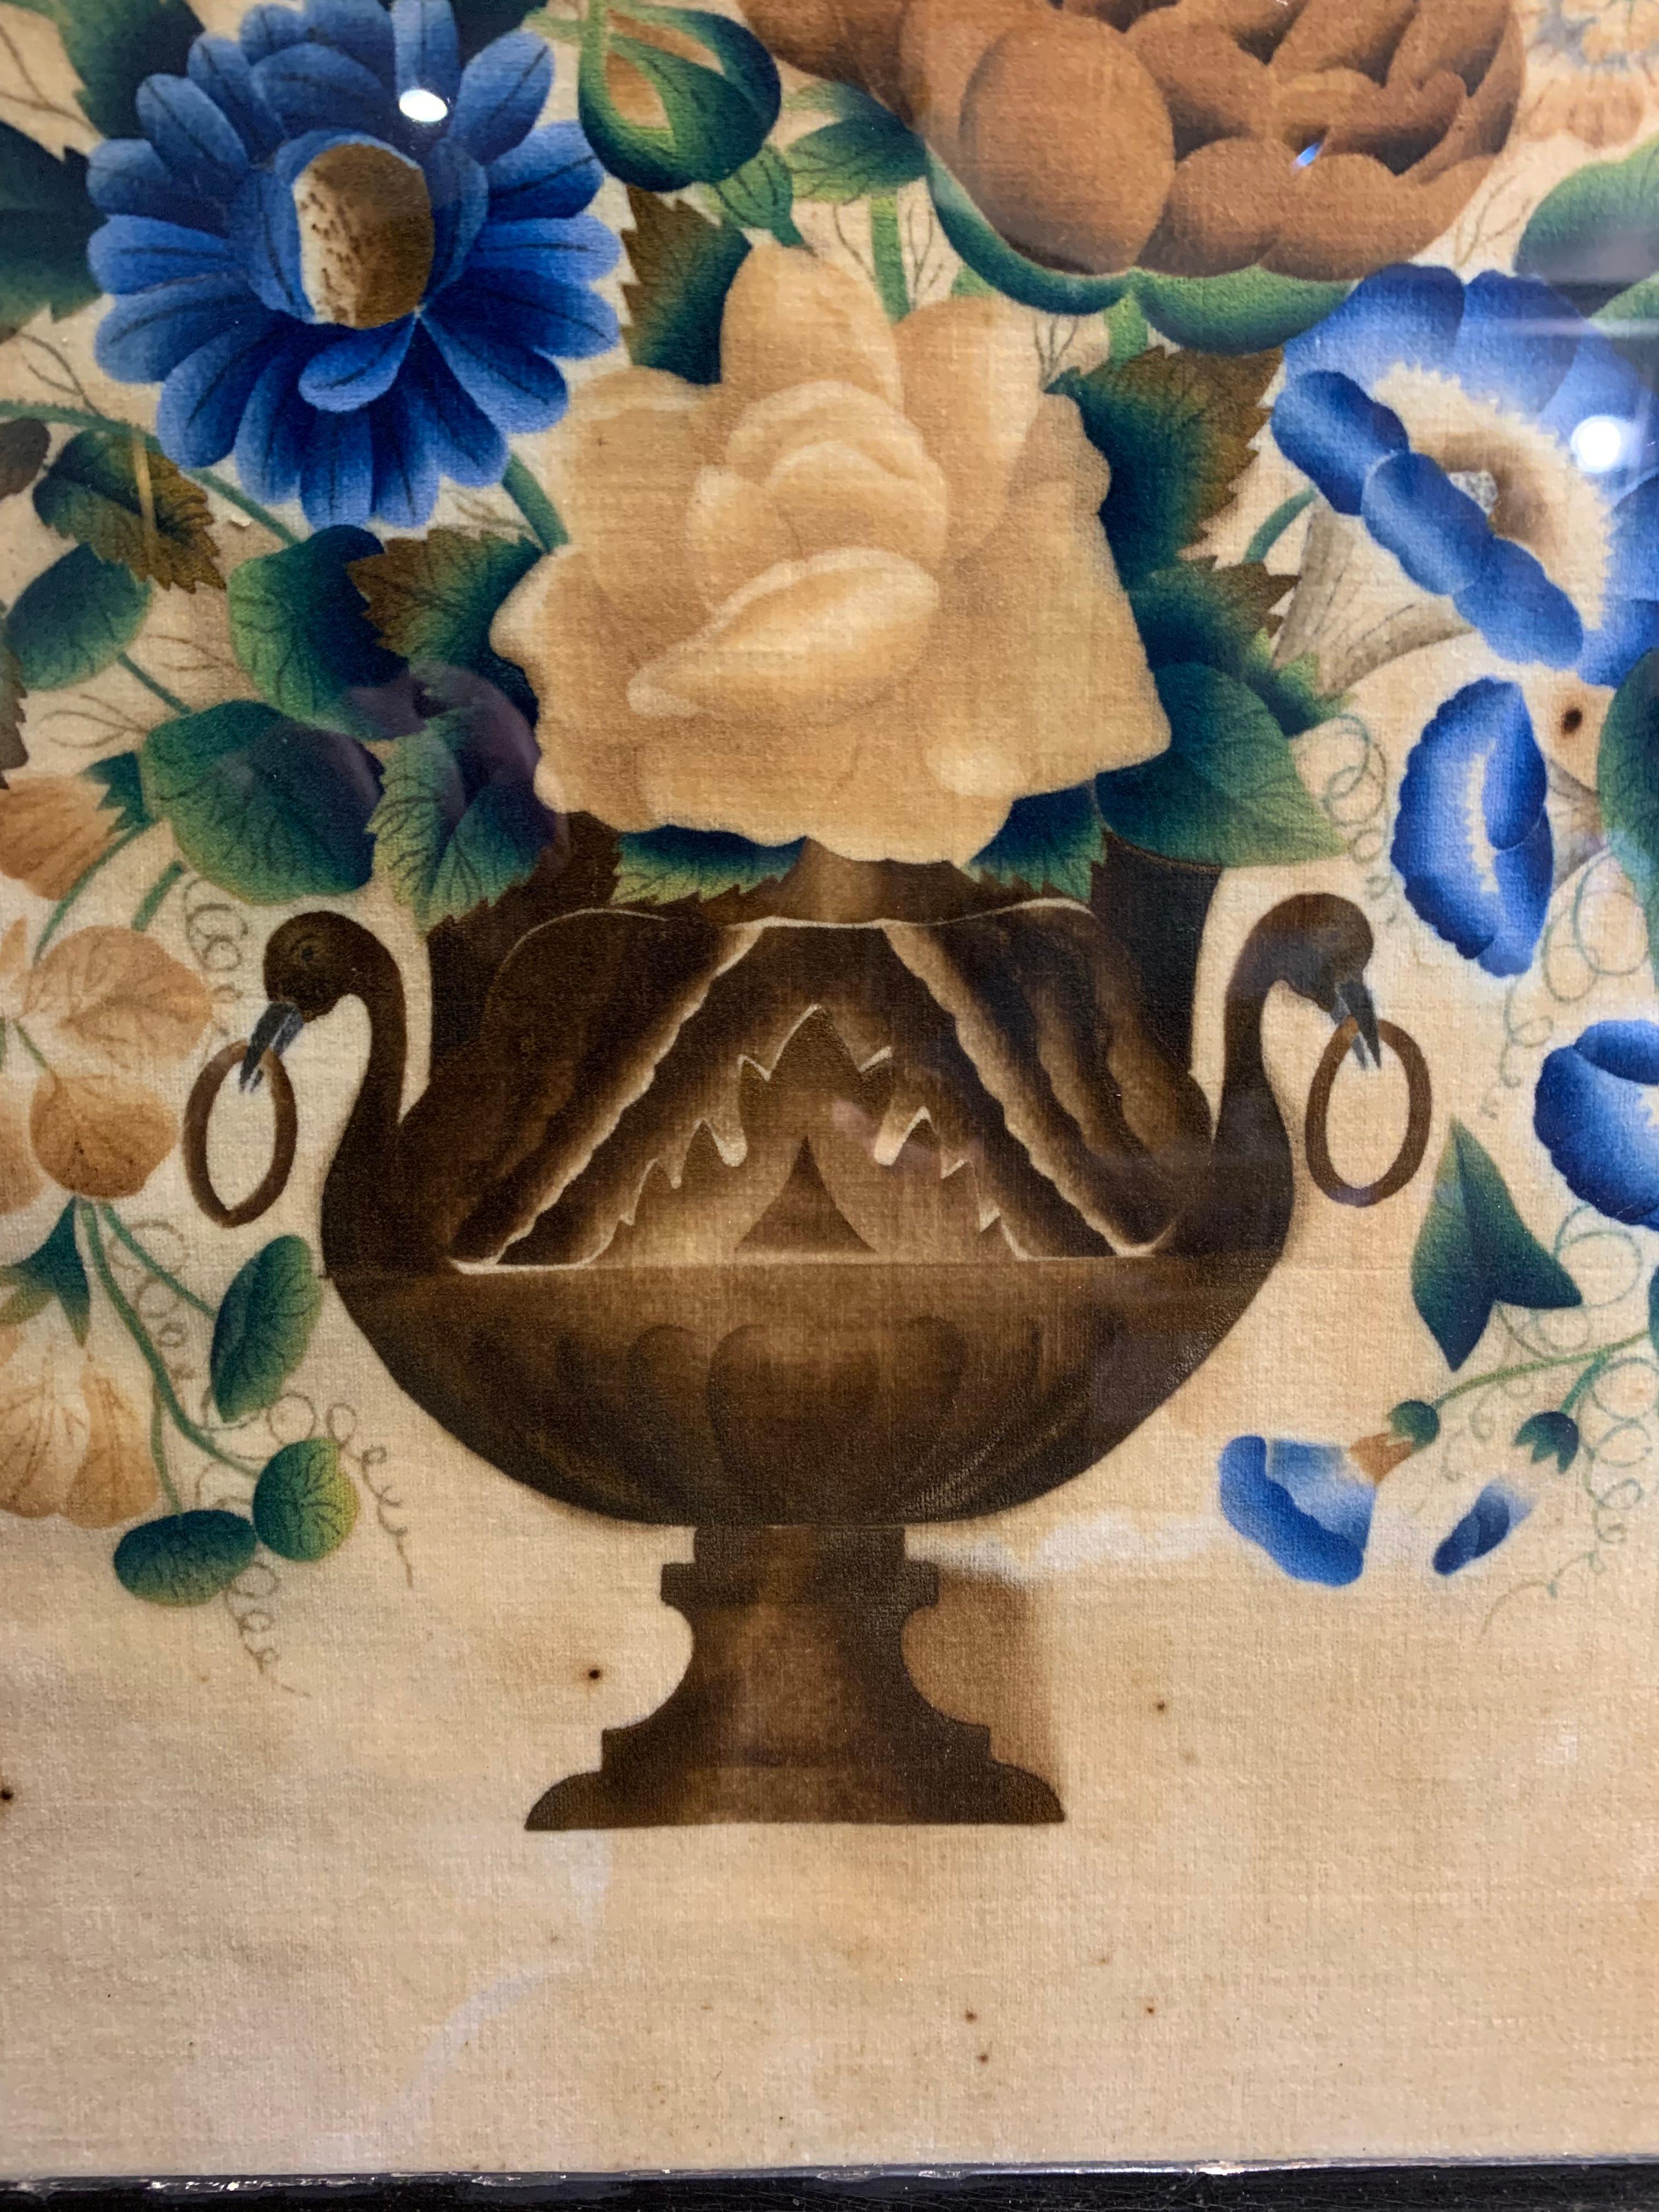 A charming French painting on velvet, circa 1890 of a classical urn full of flowers.
The deep frame is decorated and the flowers are in vibrant blues and muted colours.